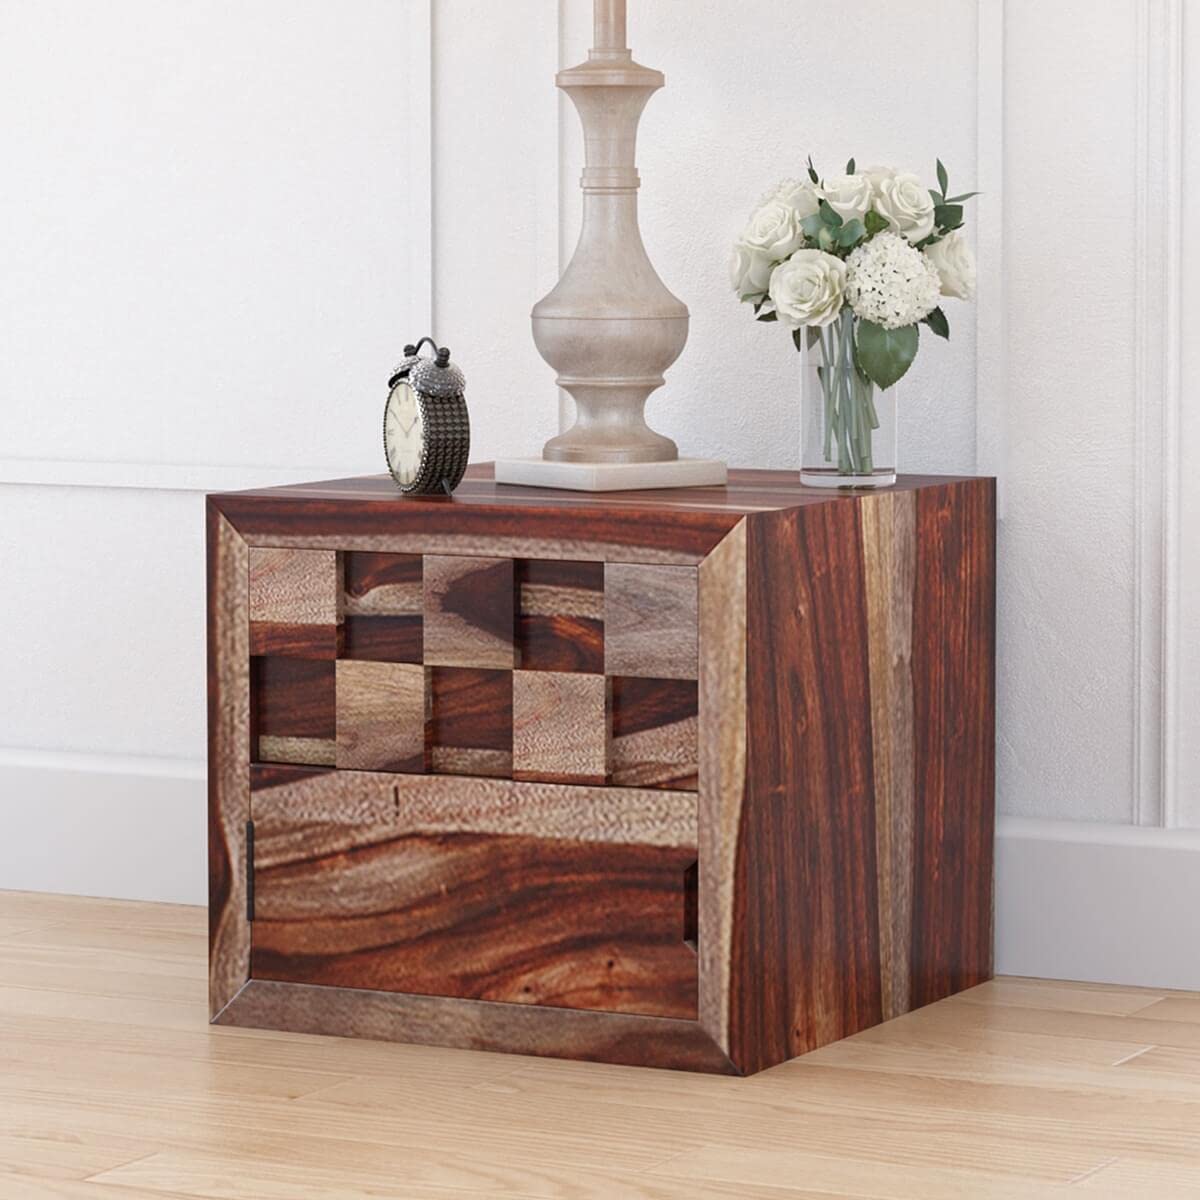 Woodmarwar Solid Sheesham Wood Bedside Table for Bedroom | Solid Wood Bed Side Nightstand End Table with 1 Drawer & 1 Door Cabinet Storage for Home & Bed Room